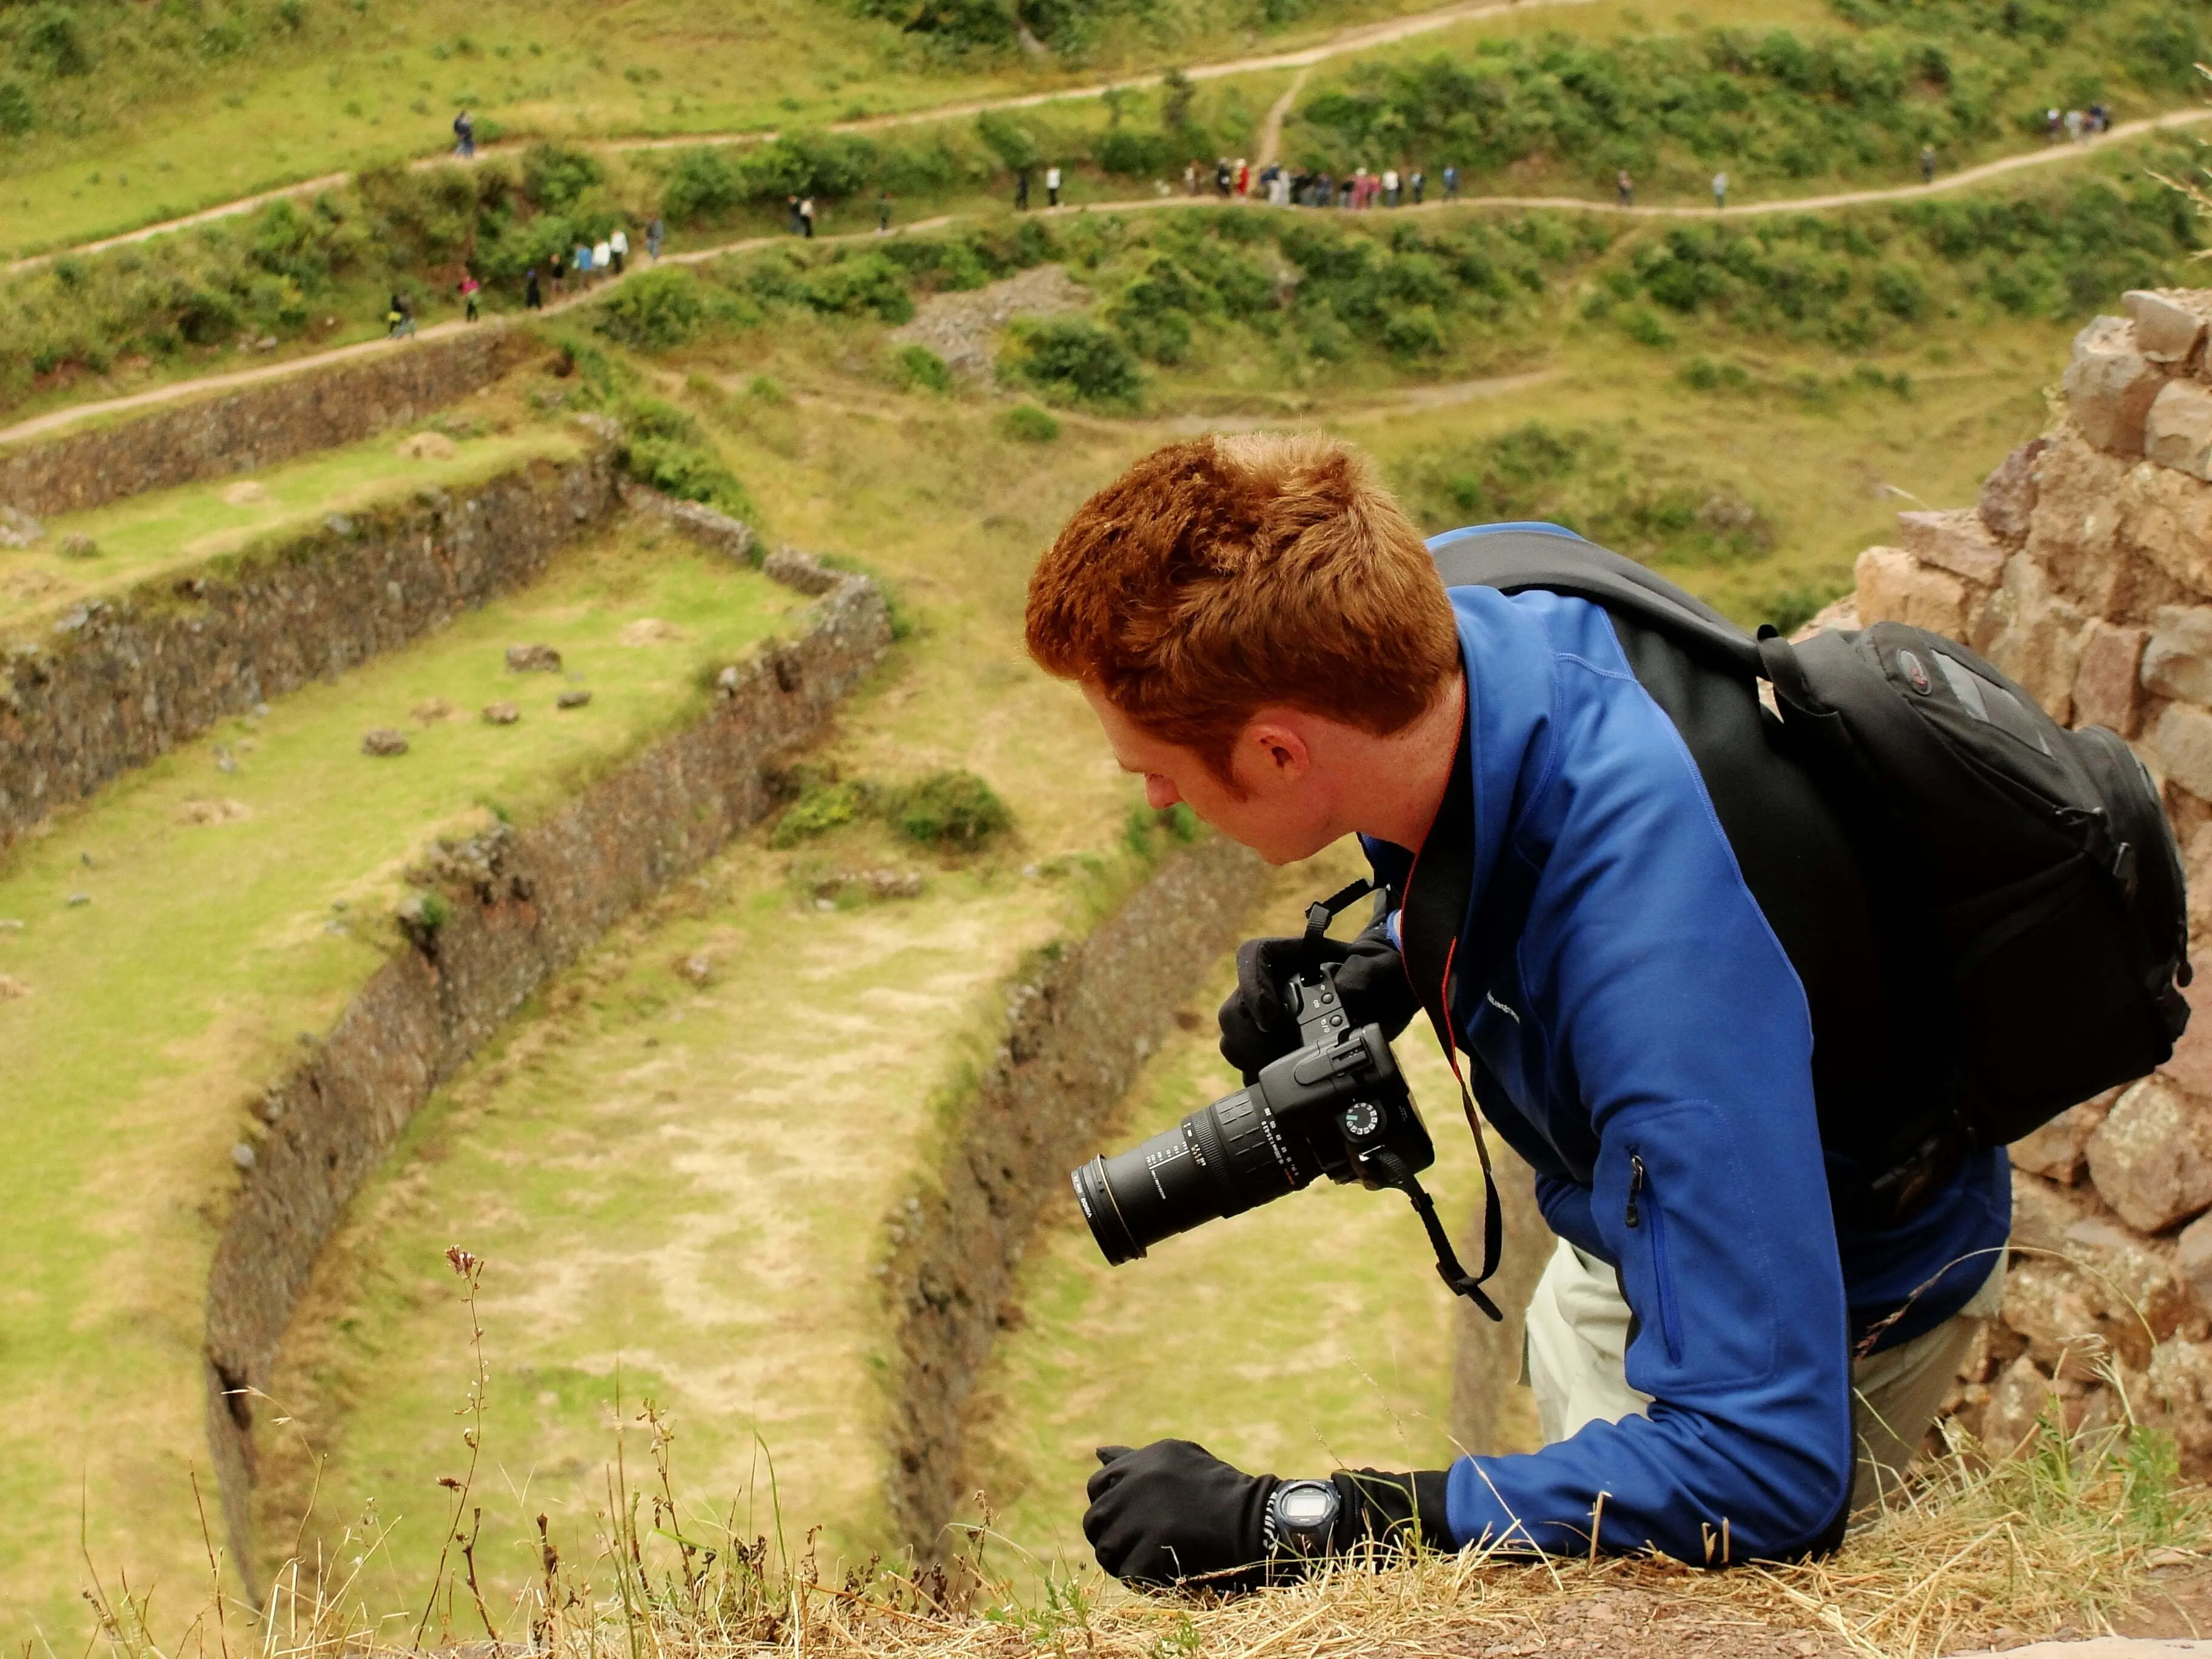 Nomadic Samuel traveling in Peru with a camera in hand